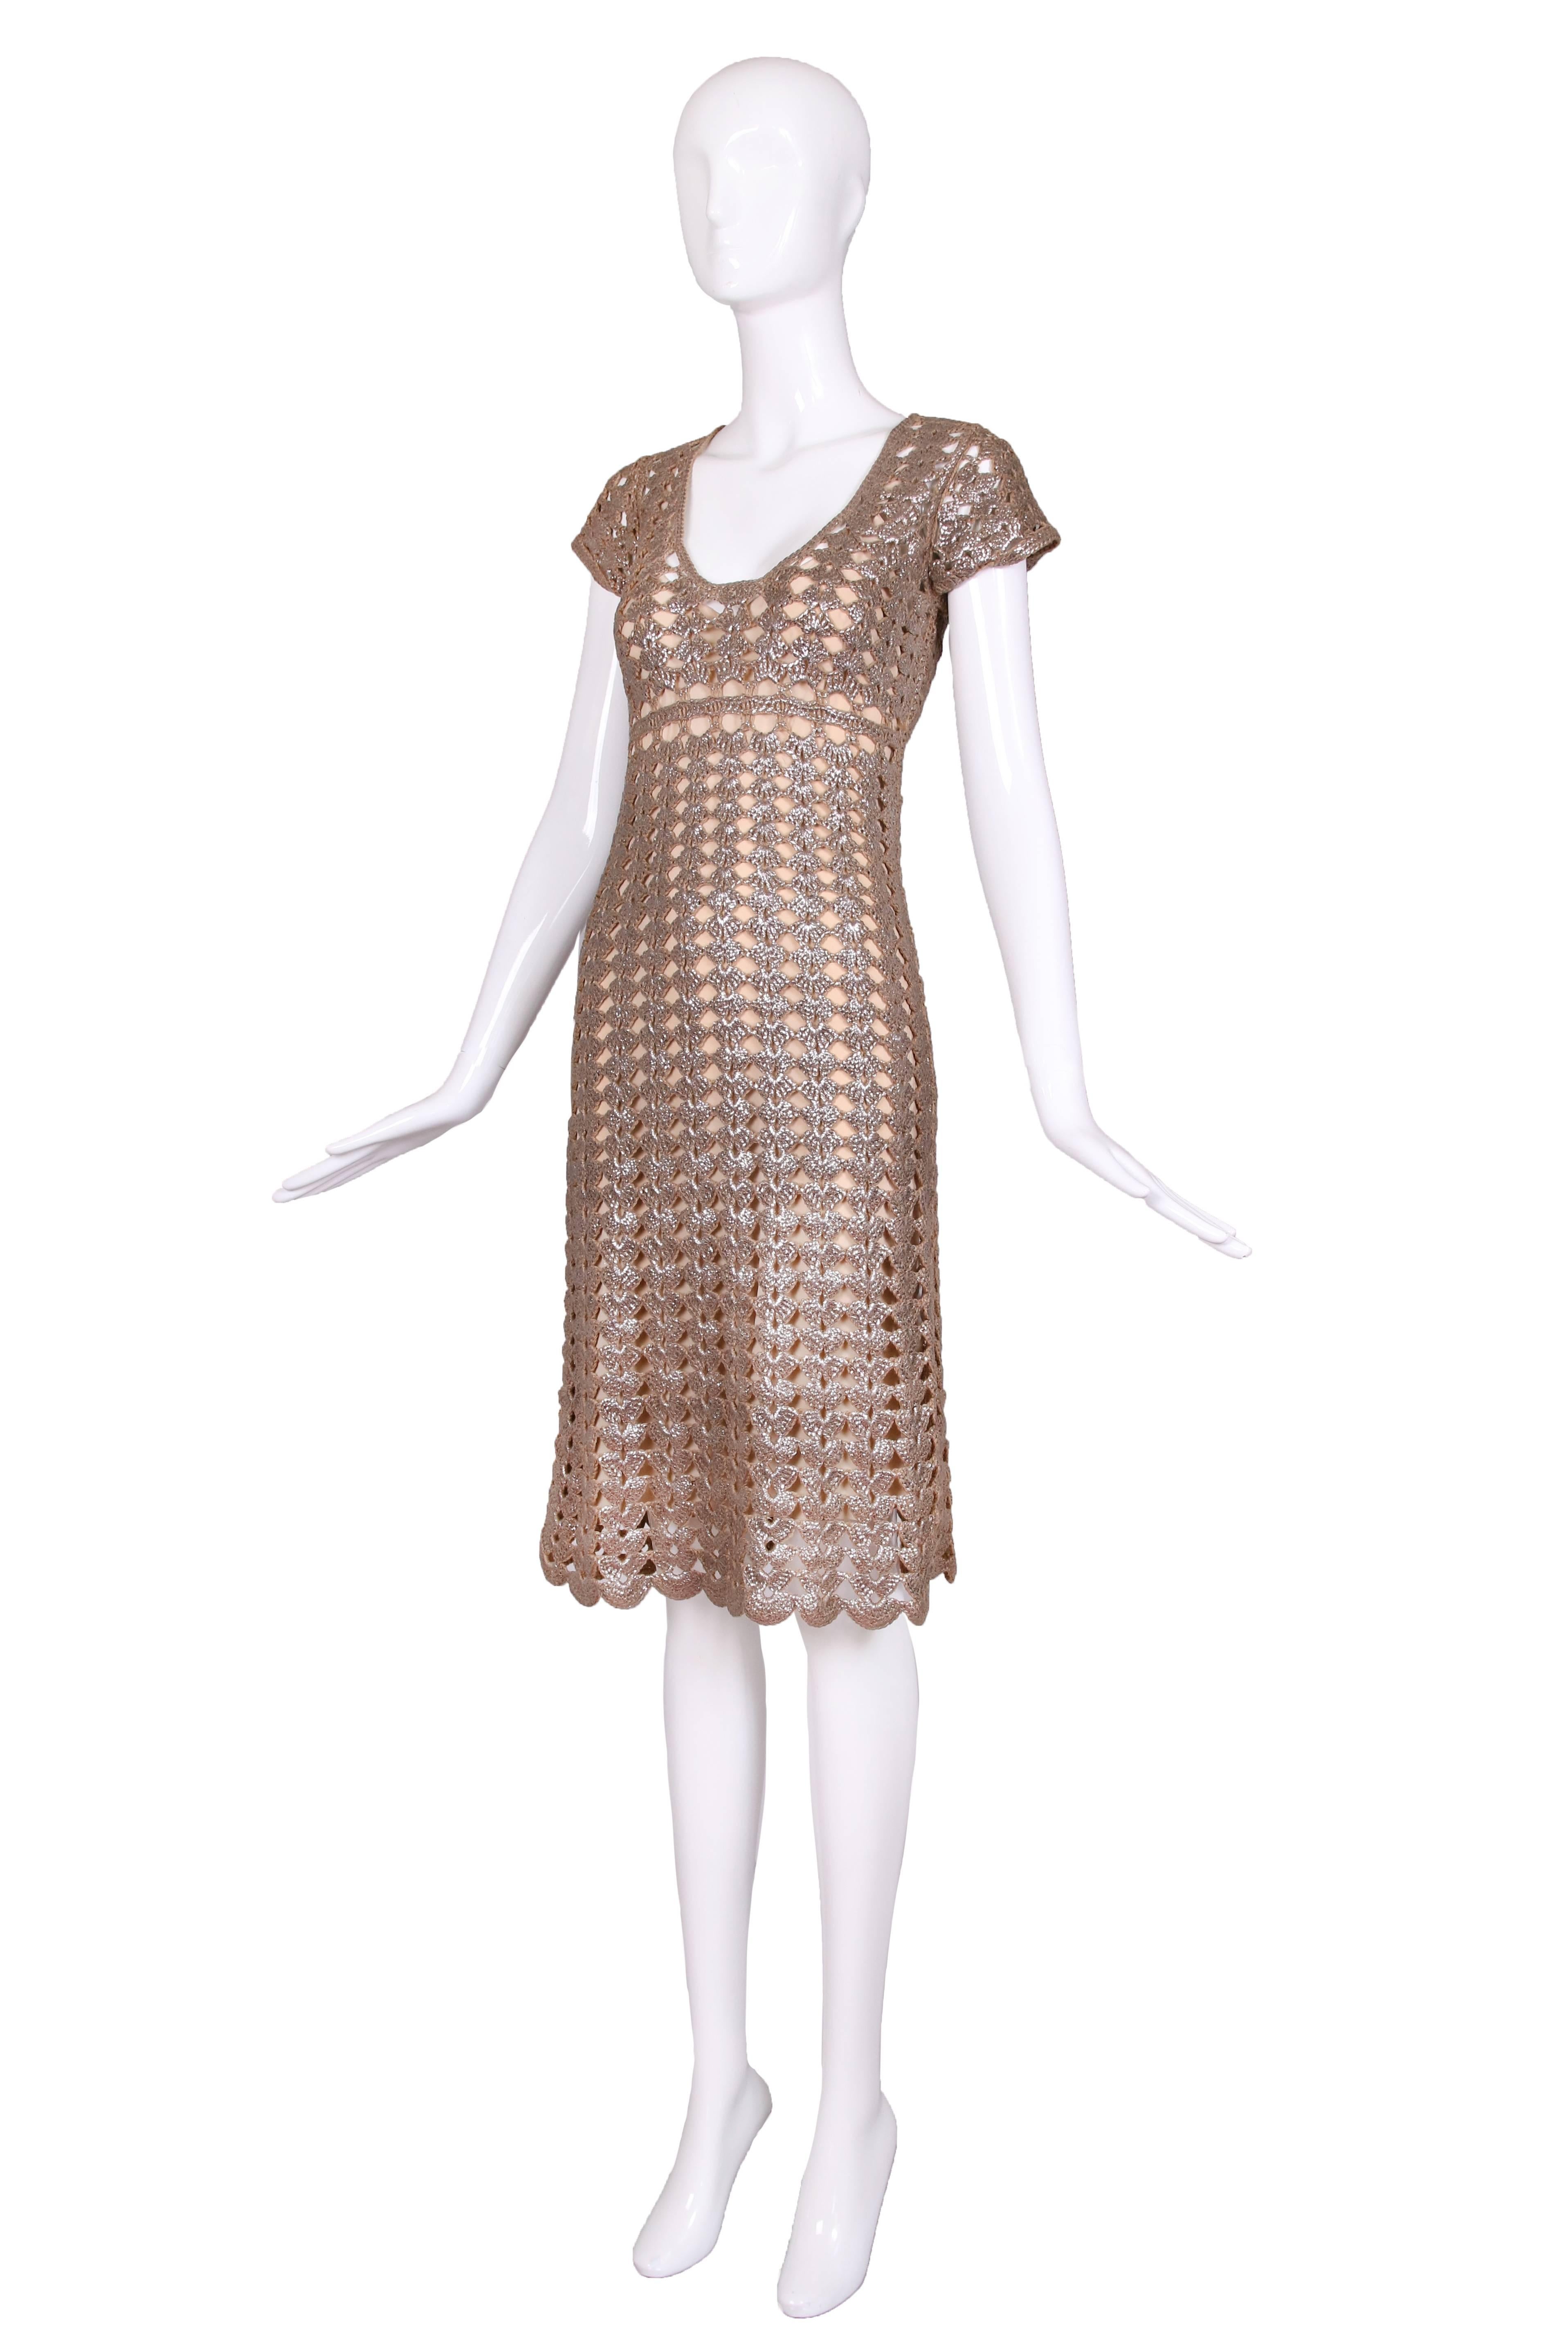 Circa 2007 Prada metallic crochet dress with nude colored slip underneath. The dress features an empire waist, scooped neck and cap sleeves. In excellent condition. Size 38.
MEAUREMENTS:
Bust - 34/36